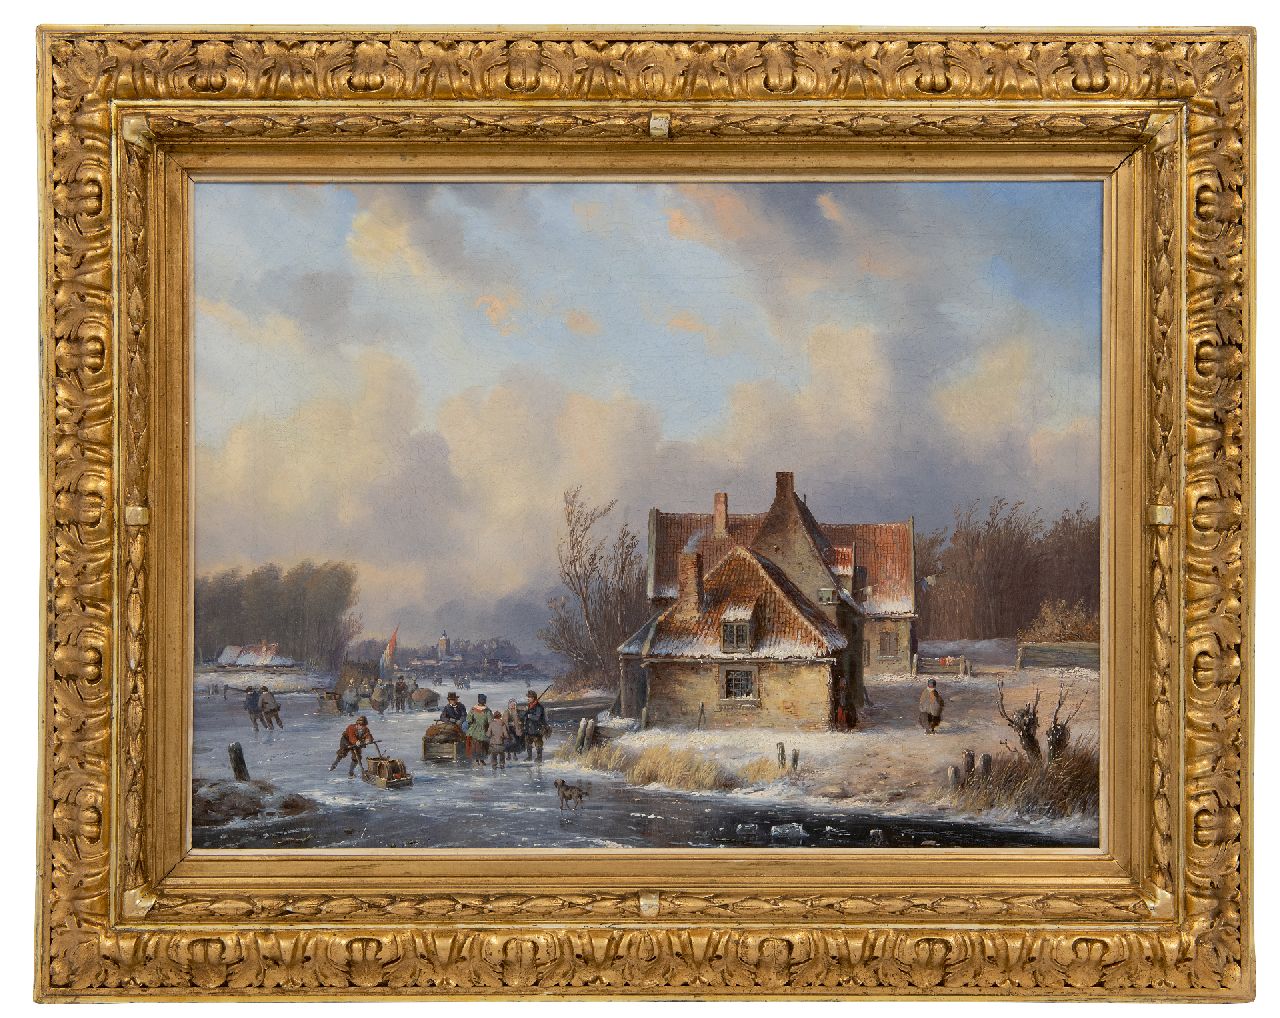 Ahrendts C.E.  | Carl Eduard Ahrendts | Paintings offered for sale | Winter landscape with many figures on a frozen river, oil on canvas 39.4 x 52.5 cm, signed l.l.